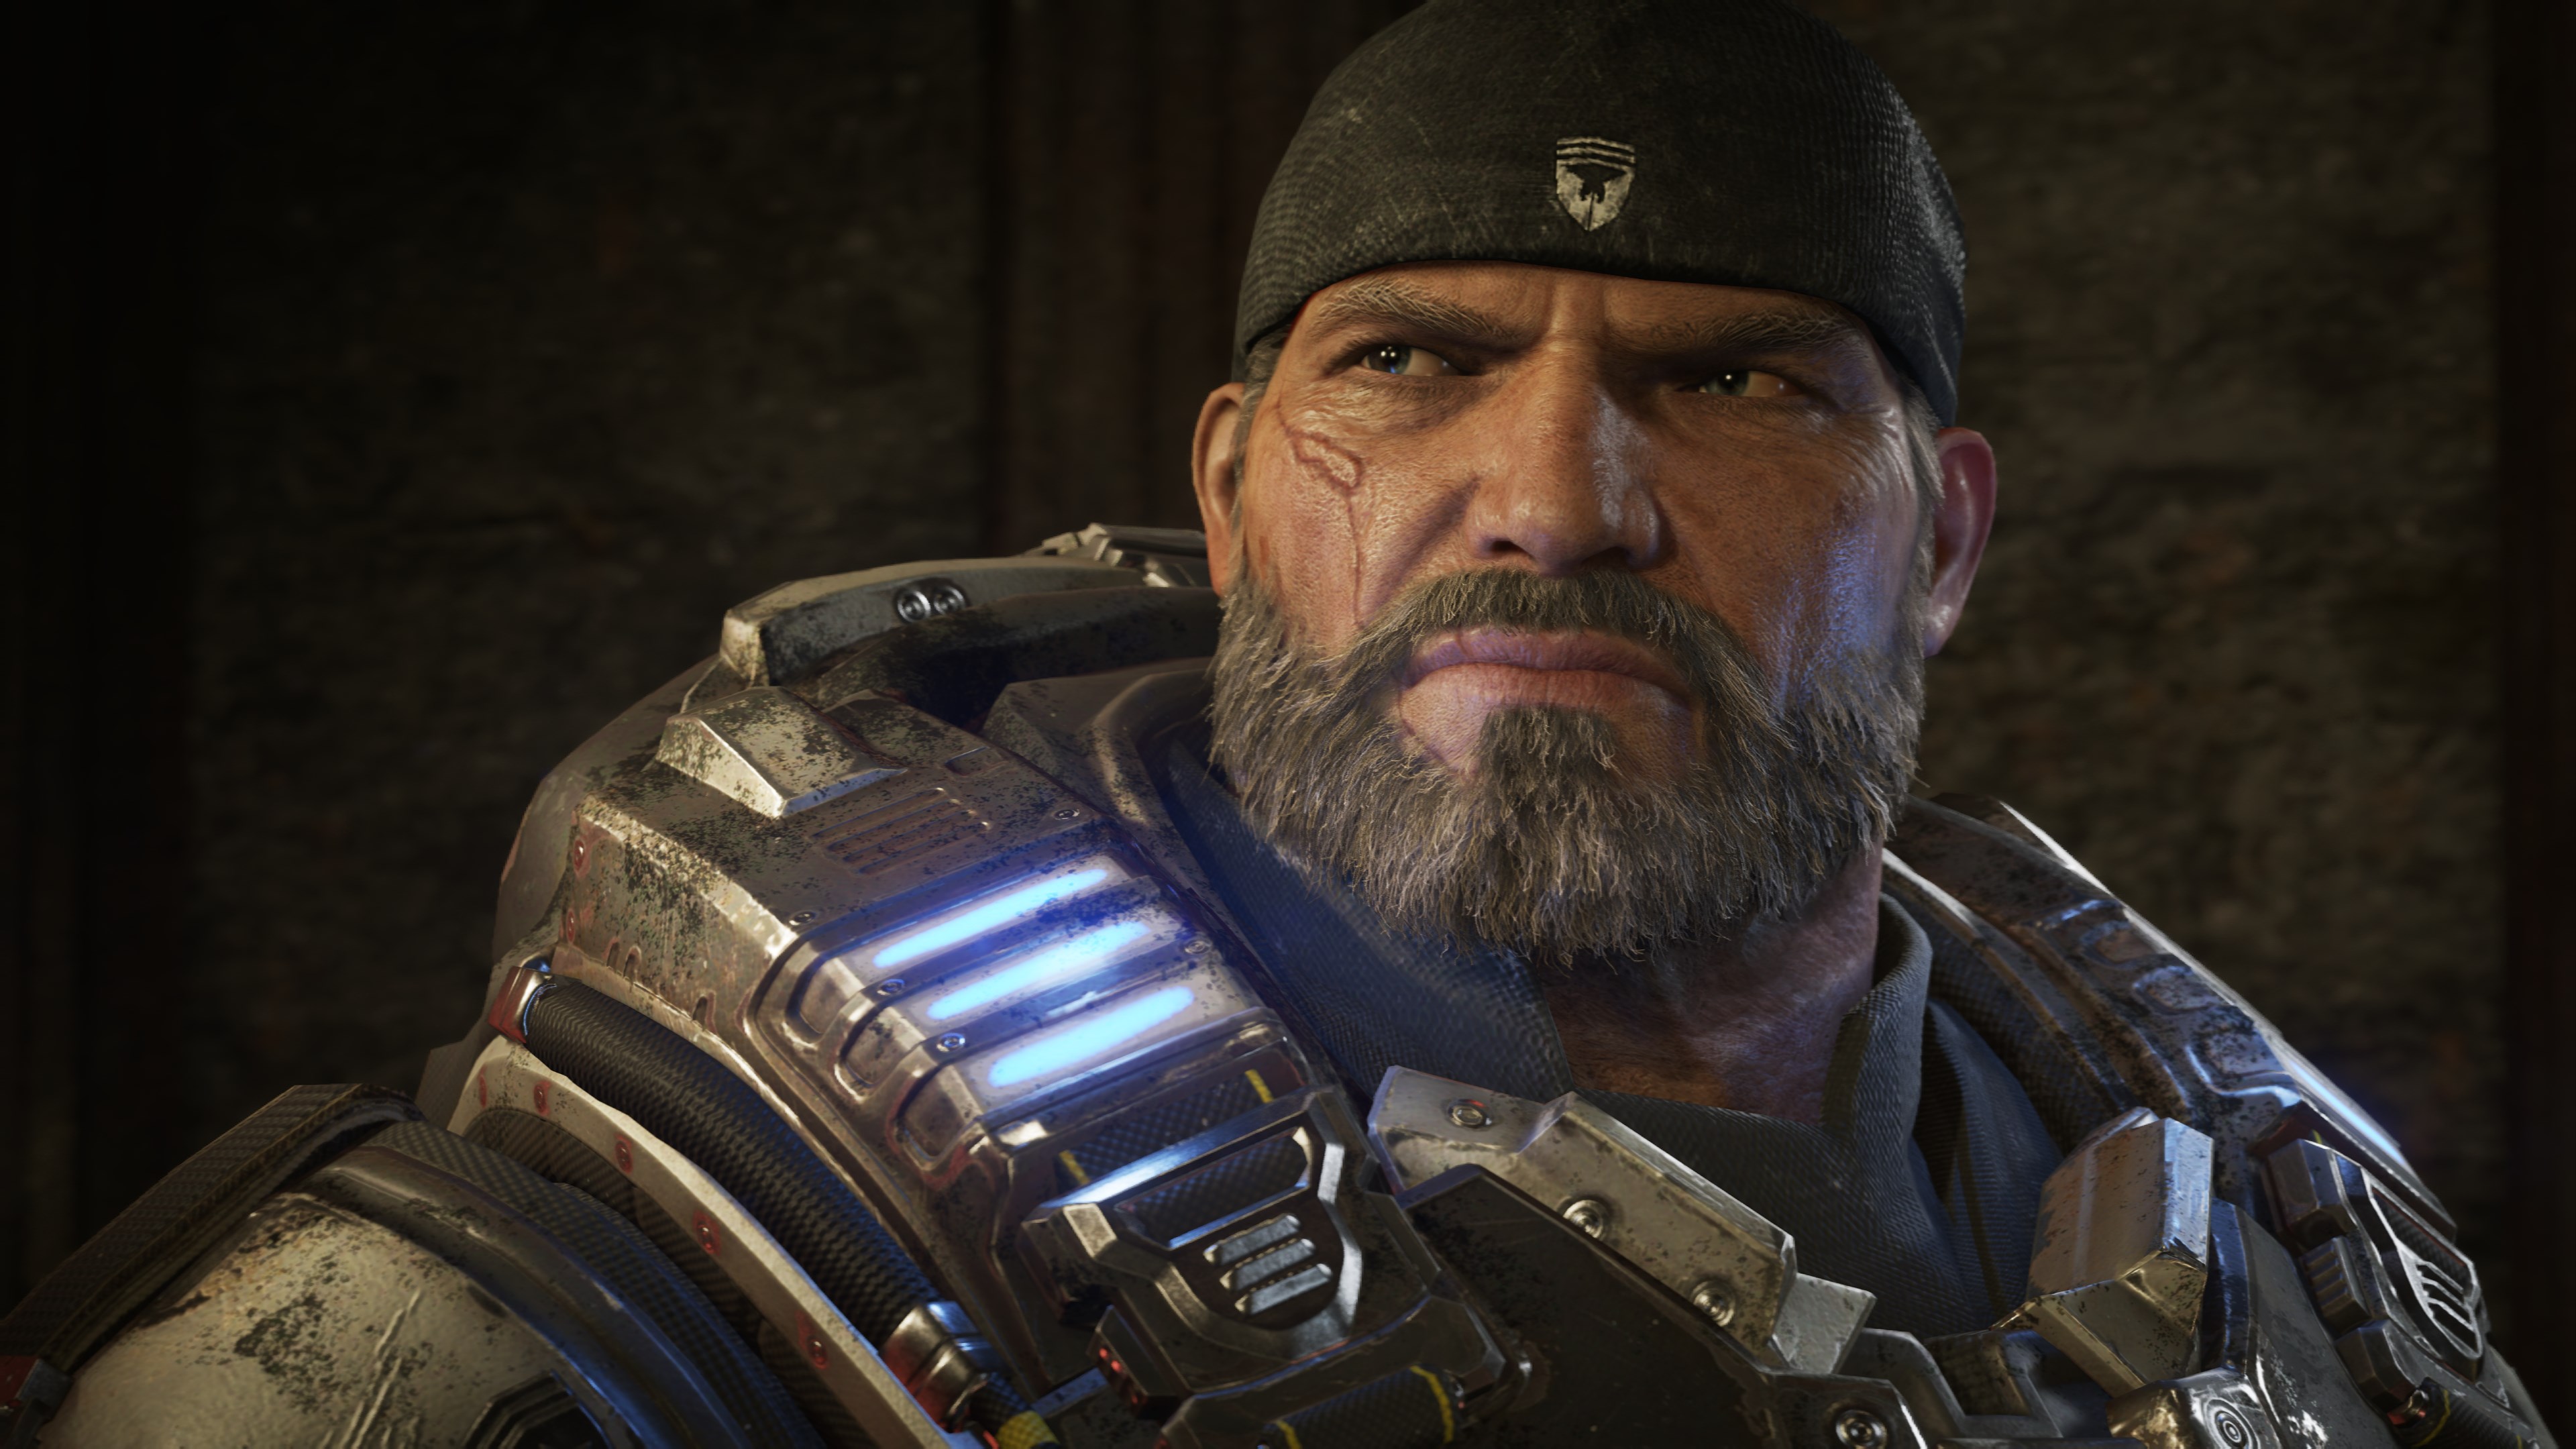 Bristolian Gamer: Gears of War 4 Review - The next generation of soldiers.